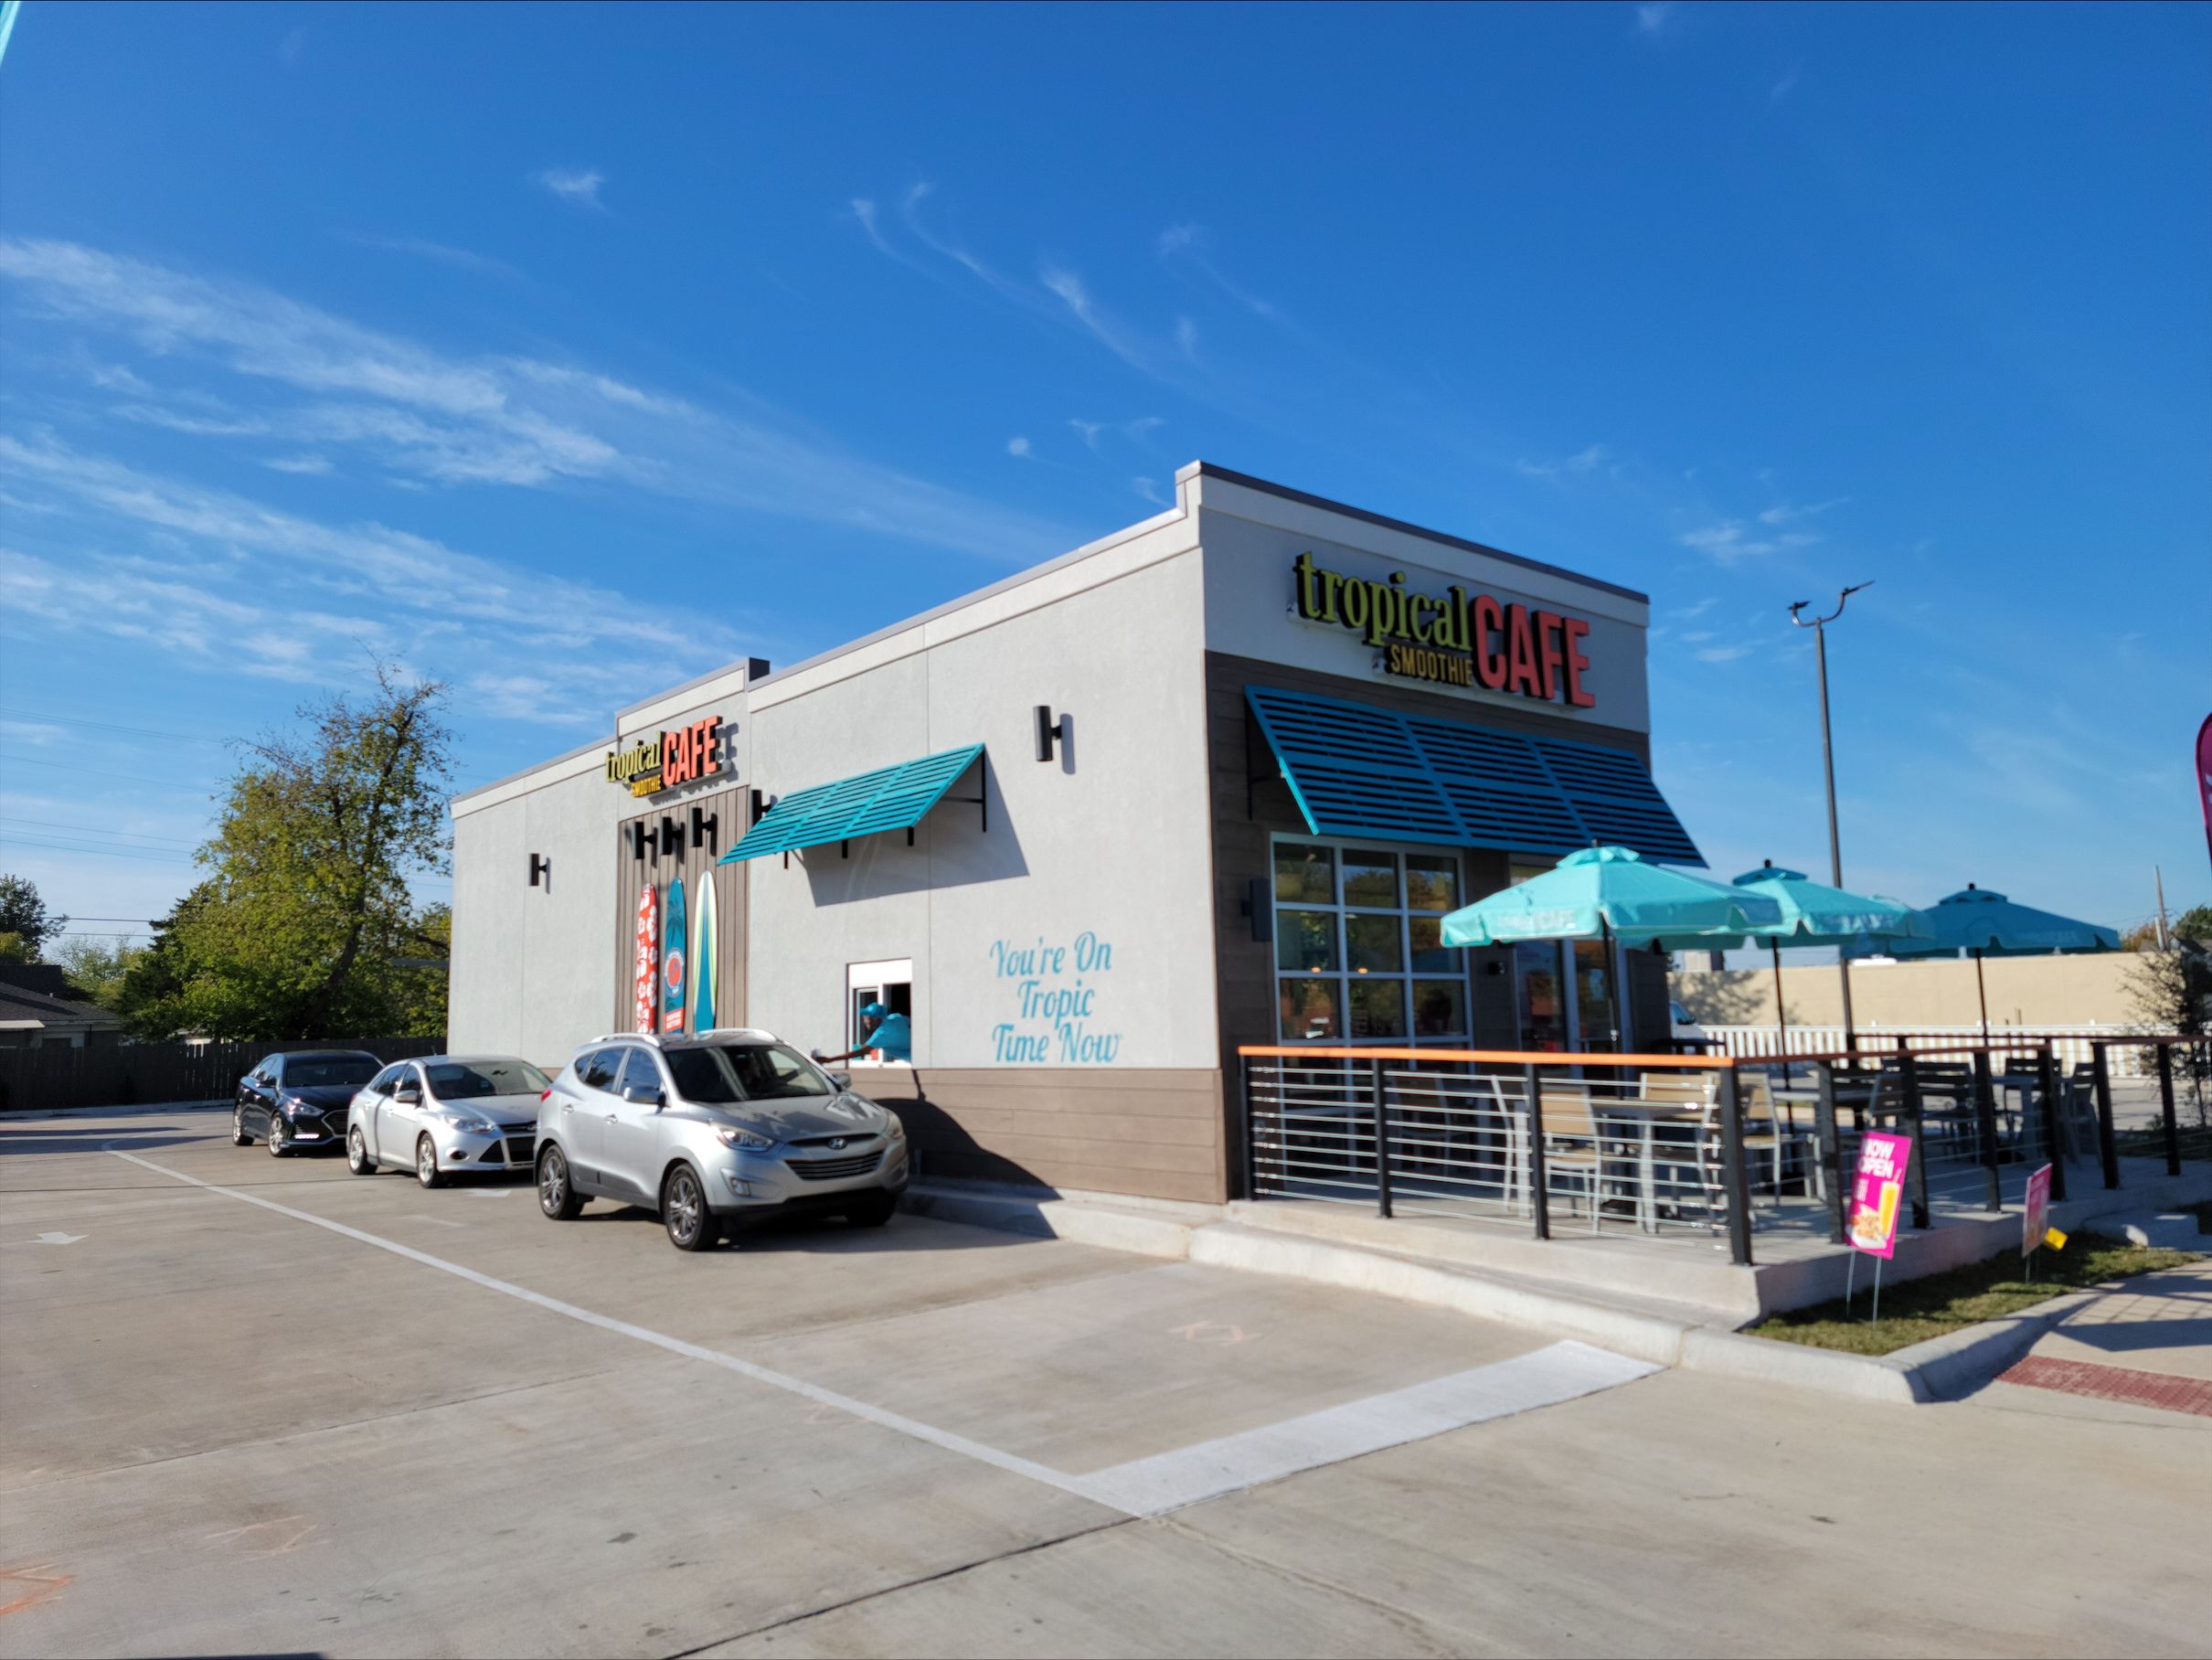 Top Smoothie Franchise, Tropical Smoothie Cafe, opens their first double drive-thru location